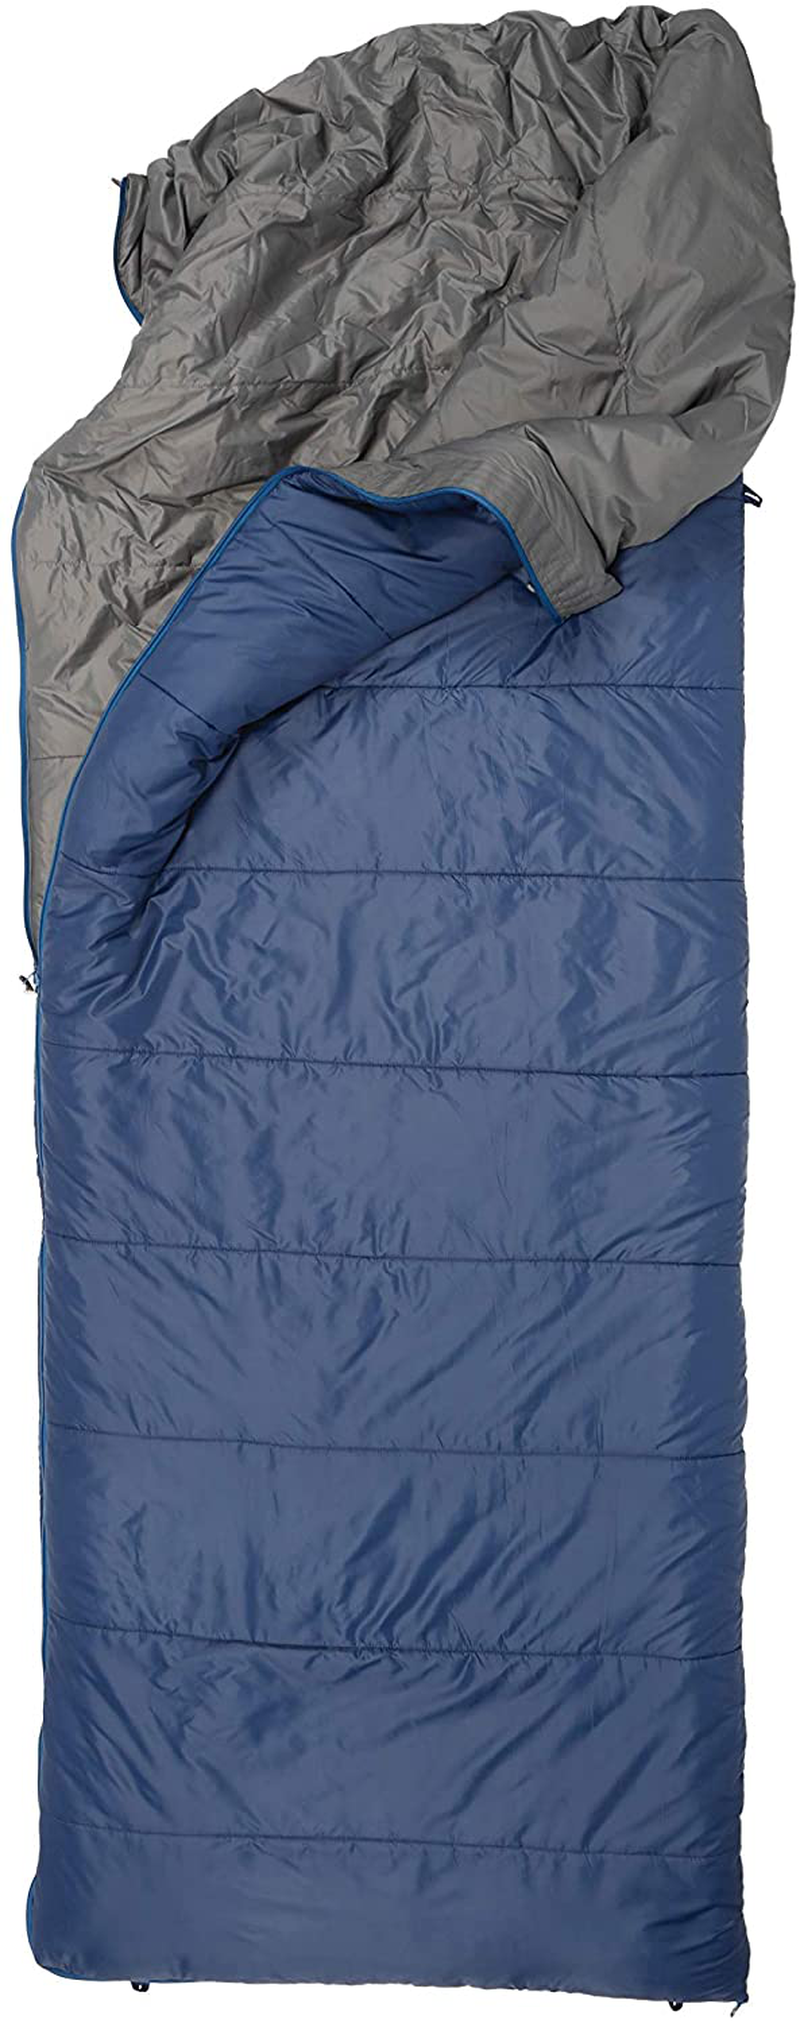 Exped Megasleep Sleeping Bags, Single and Double Sporting Goods > Outdoor Recreation > Camping & Hiking > Sleeping Bags Exped Reversible - Single - Medium  